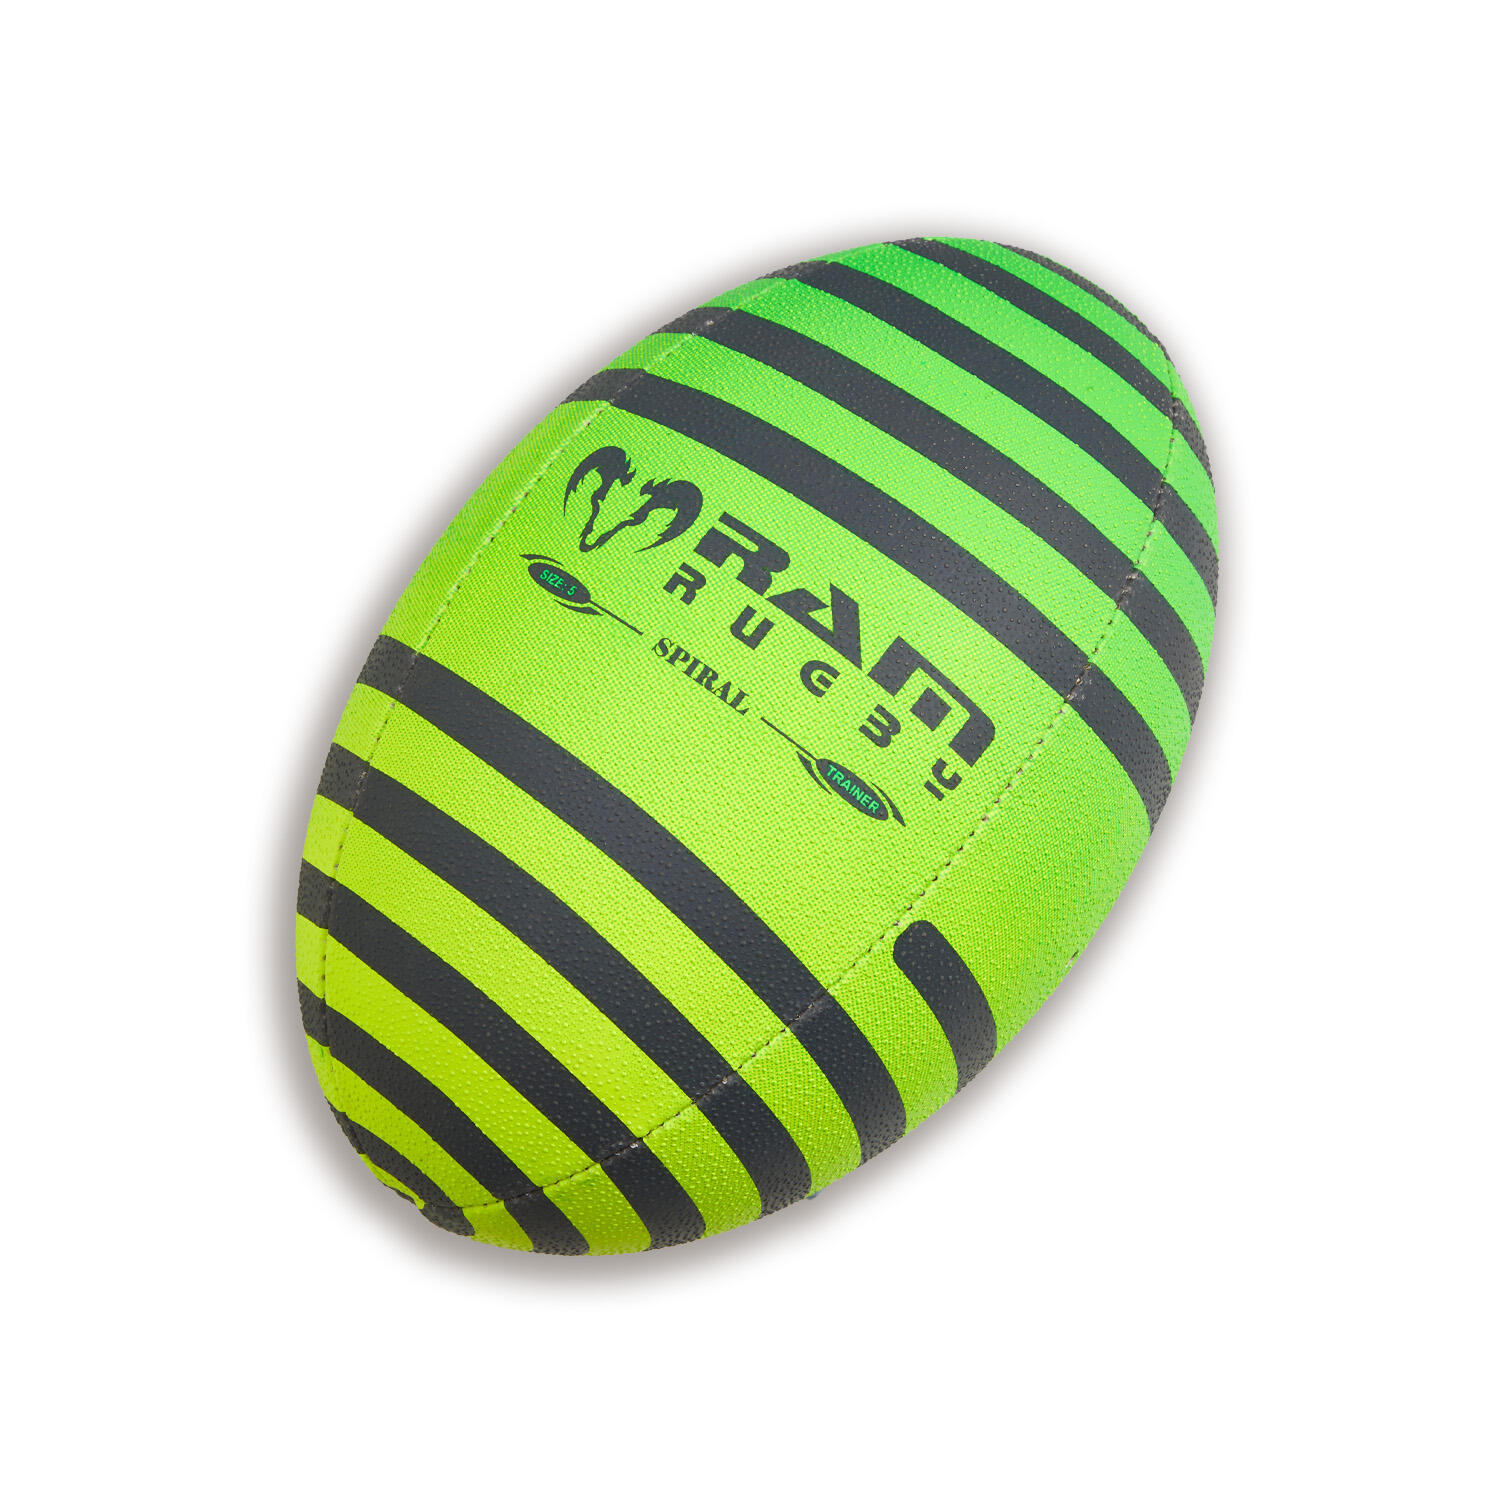 Ram Rugby Ball - Squad - Trainer - (Size 3) - Spiral 3/6